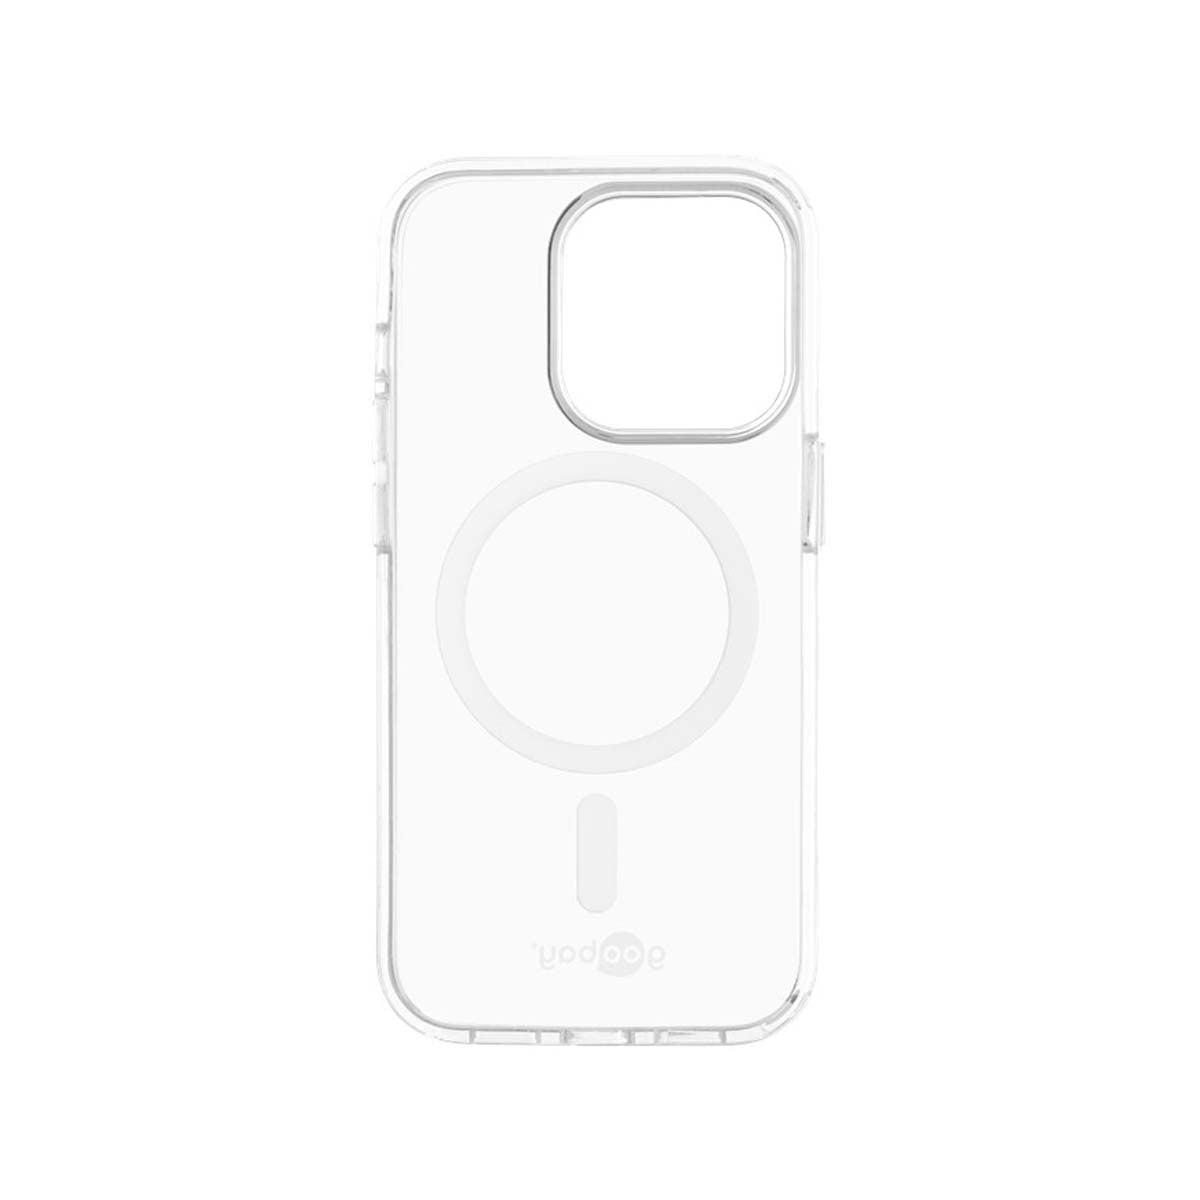 Goobay PureFlex+ Phone Case for iPhone 14 Pro Max - Clear.